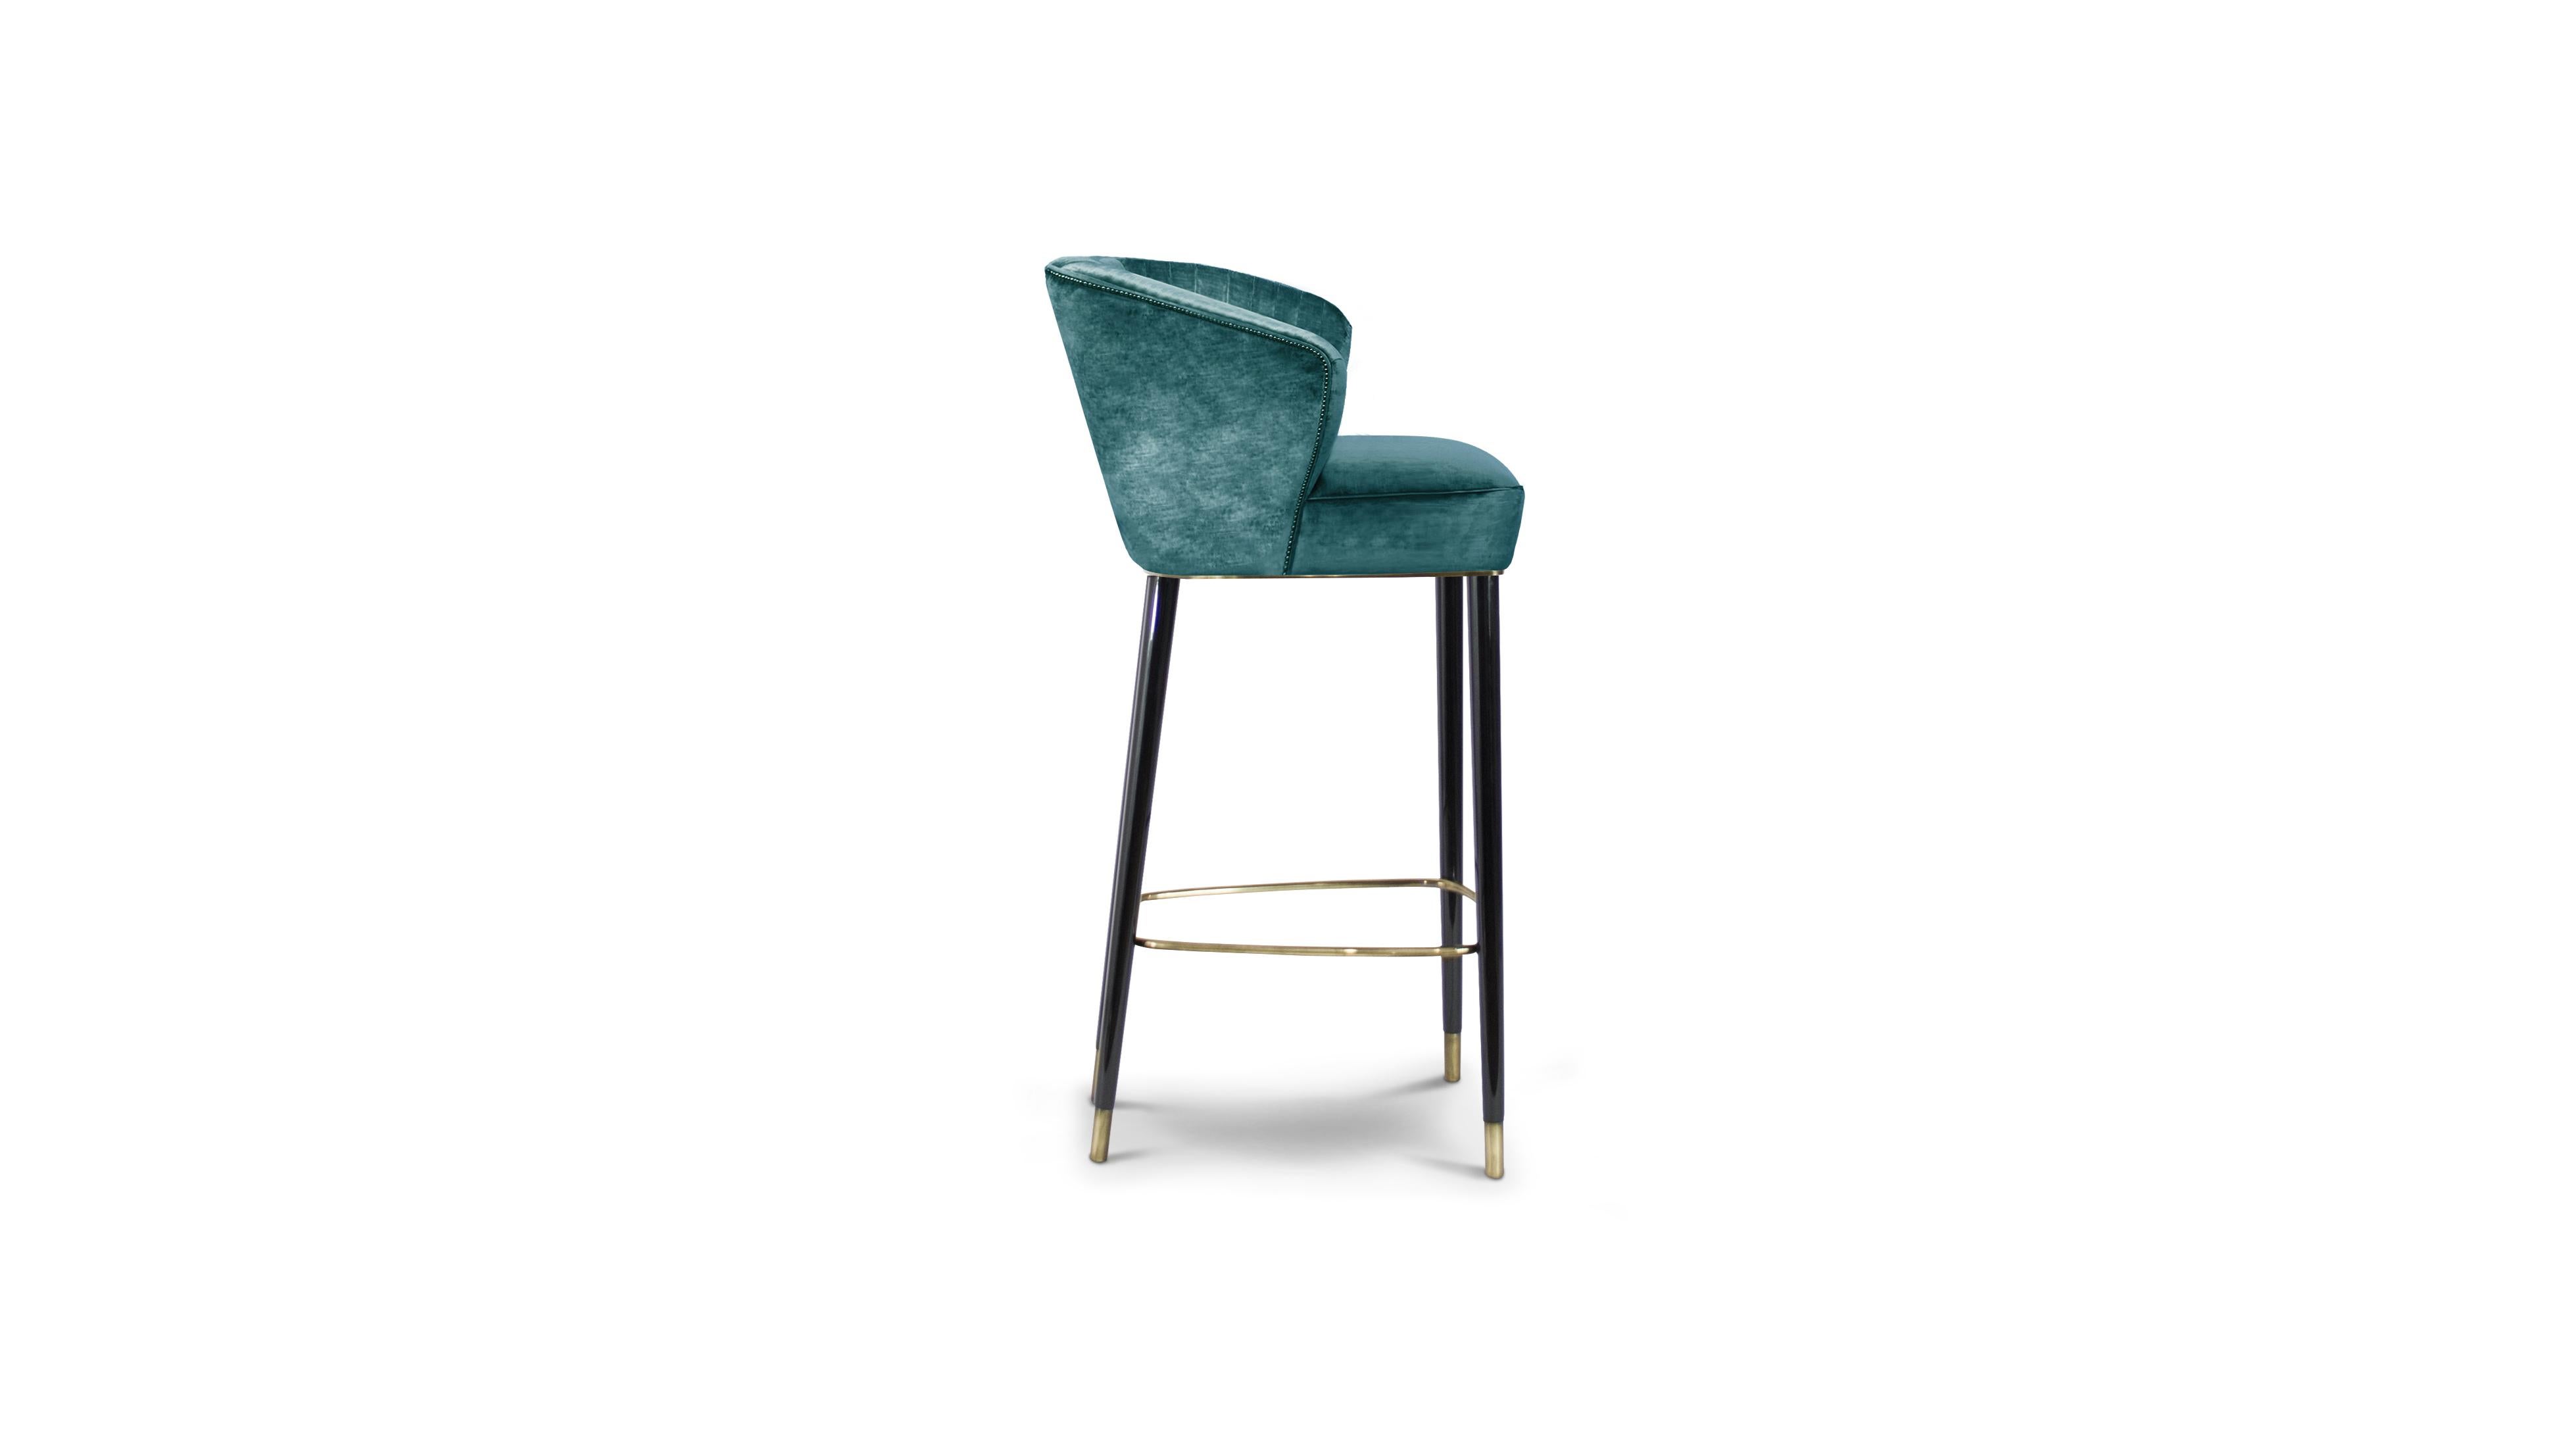 Nuka is a glacier in Alaska known for its sublime beauty. NUKA Bar Chair came to life inspired by this magnificent natural monument. Upholstered in velvet and legs in glossy black lacquered, this occasional chair with a curved back will make any bar